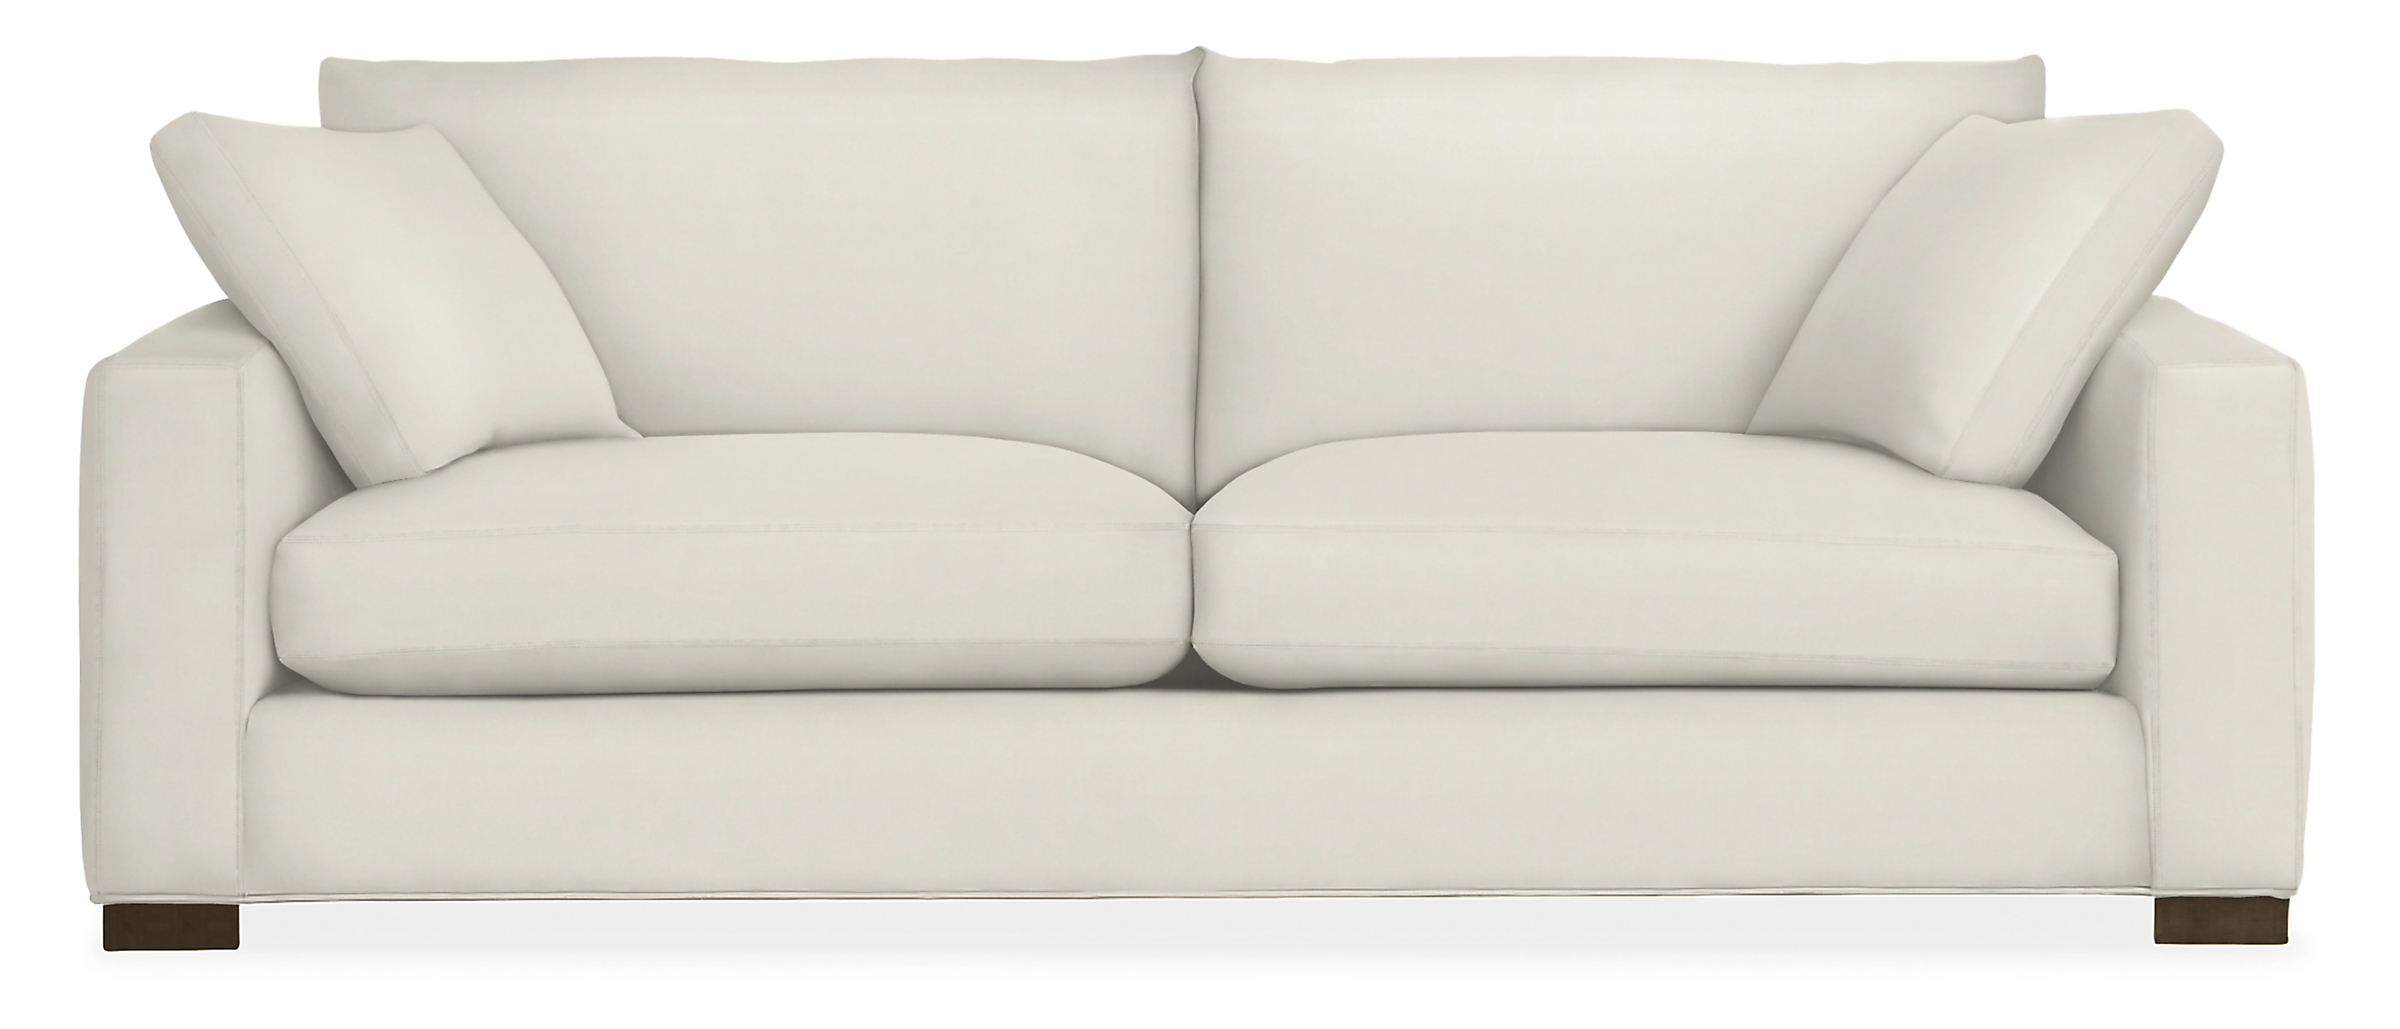 Metro 88" Two-Cushion Sofa in Tepic White with Charcoal Legs